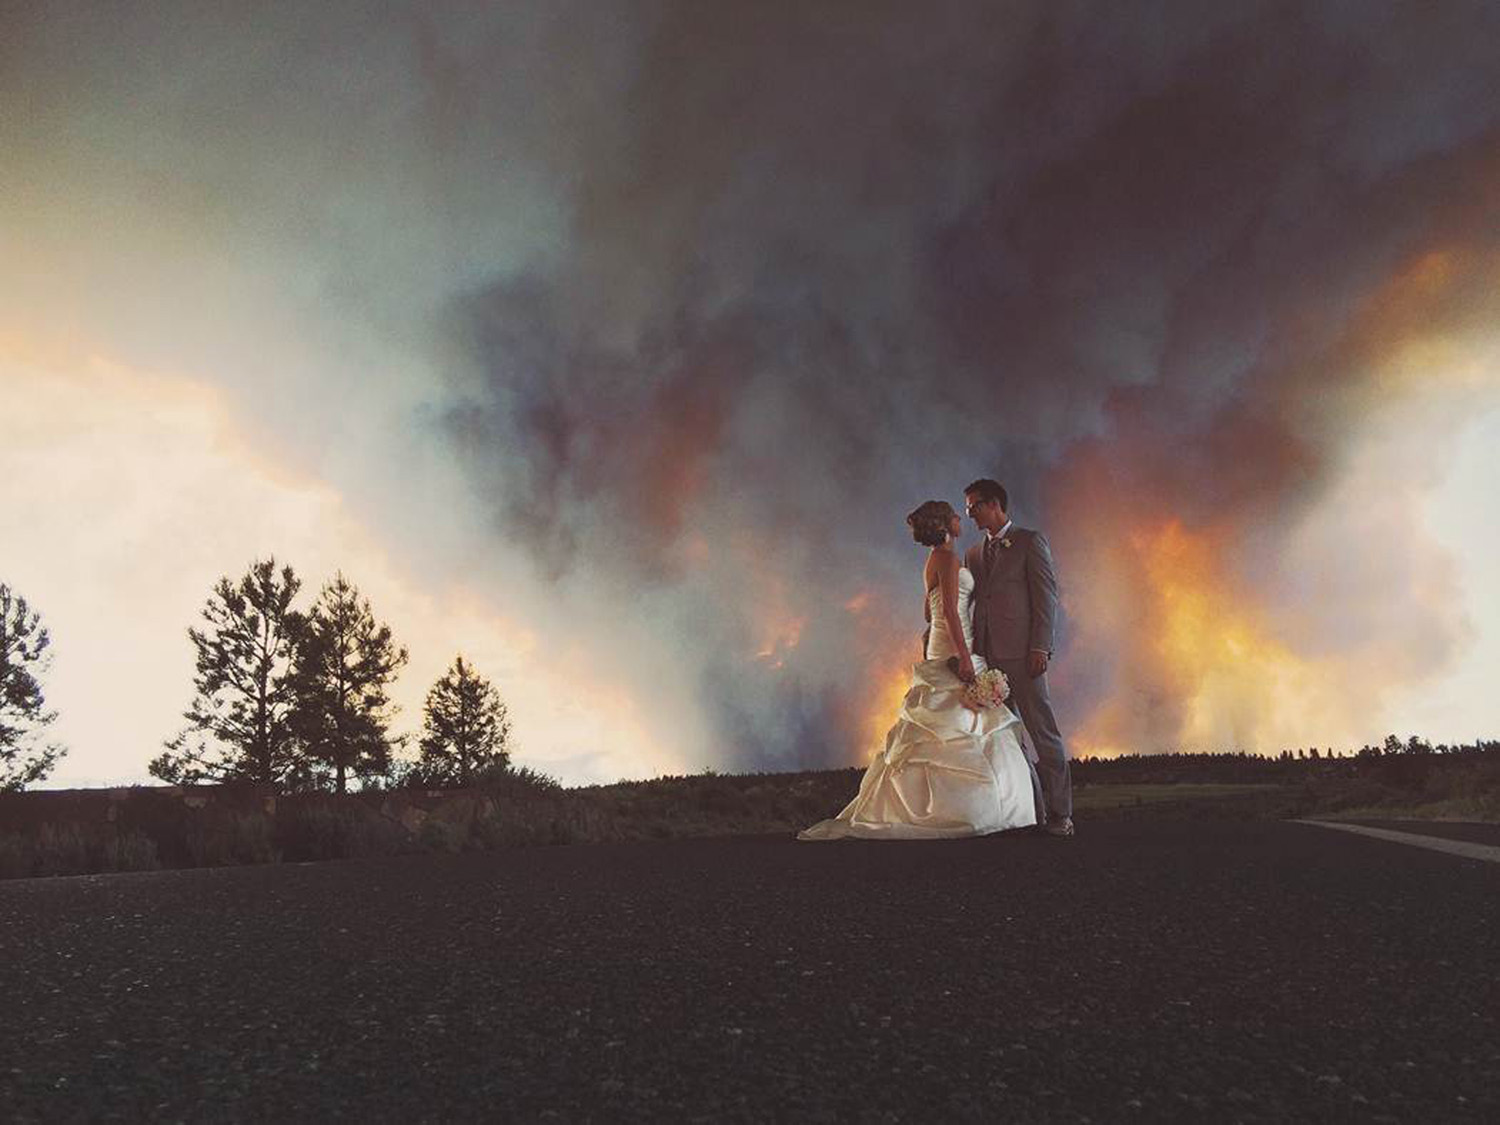 Newlyweds Michael Wolber and April Hartley pose for a picture as a wildfire burns in the background near Bend, Ore., June 7, 2014.